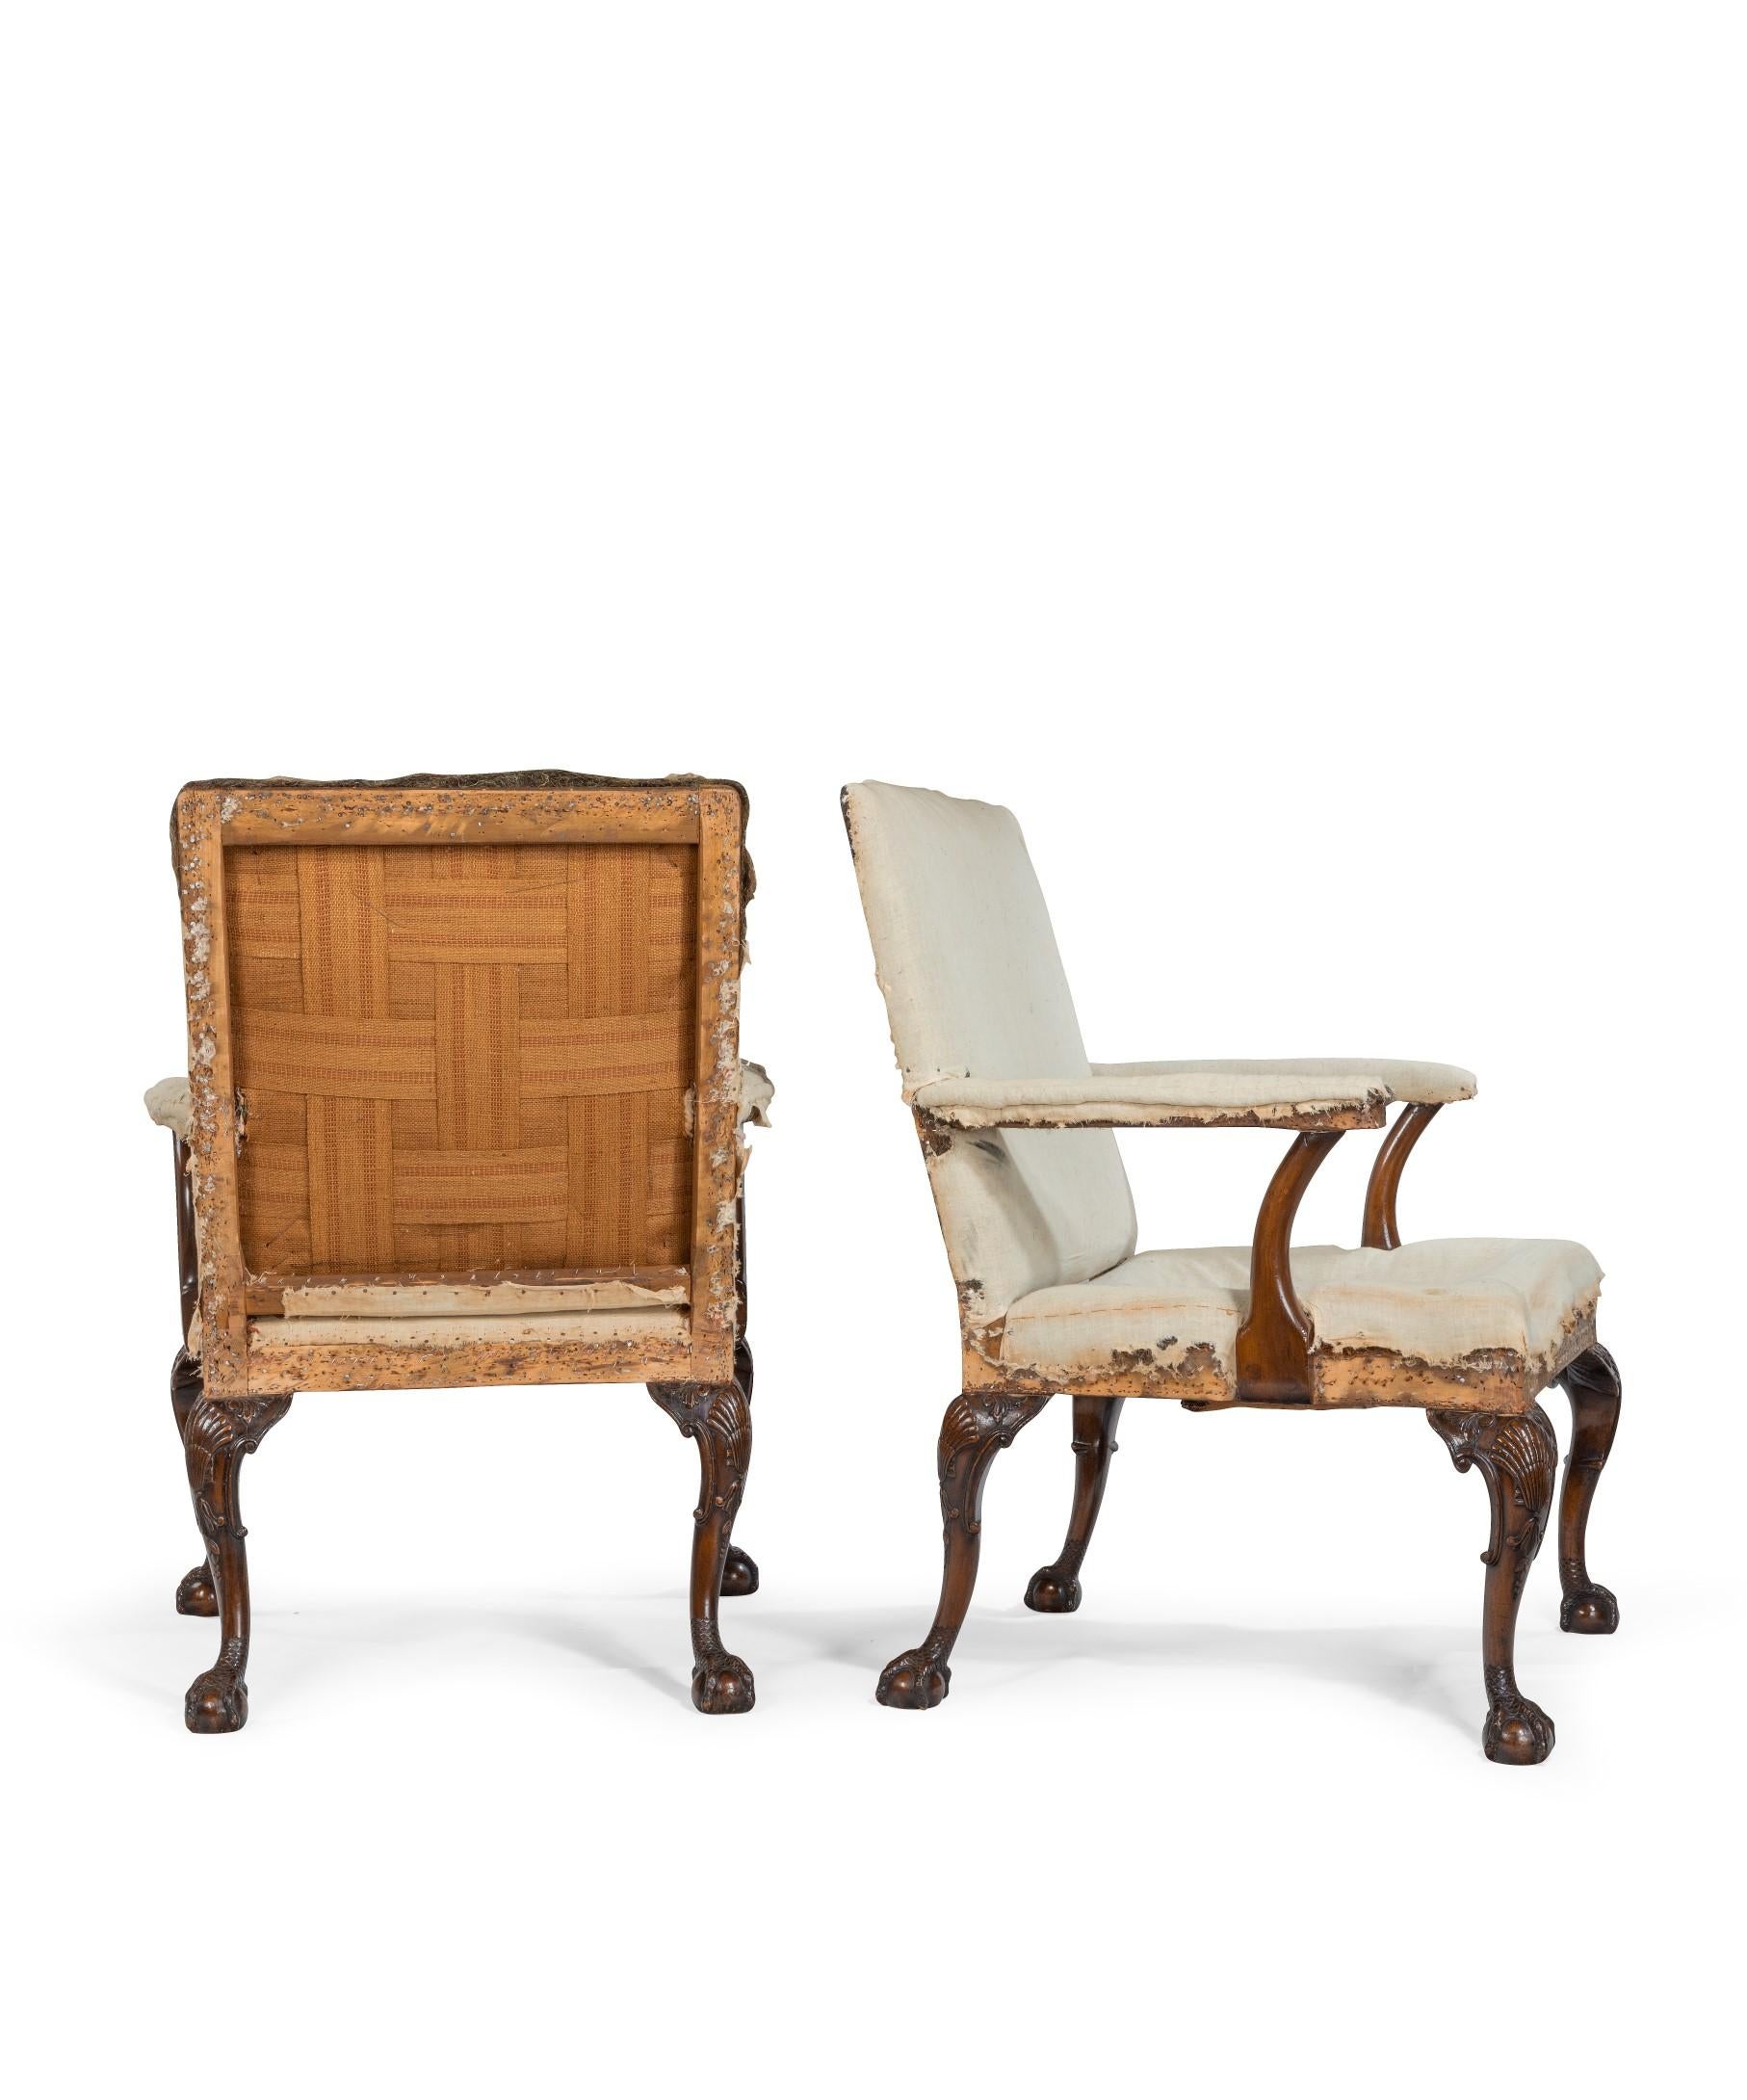 A handsome pair of early 19th century carved mahogany Gainsborough armchairs; the upholstered back and seat with upholstered back and seat and raised in crisply carved mahogany cabriole legs to front and rear. The cabriole legs are beautifully drawn